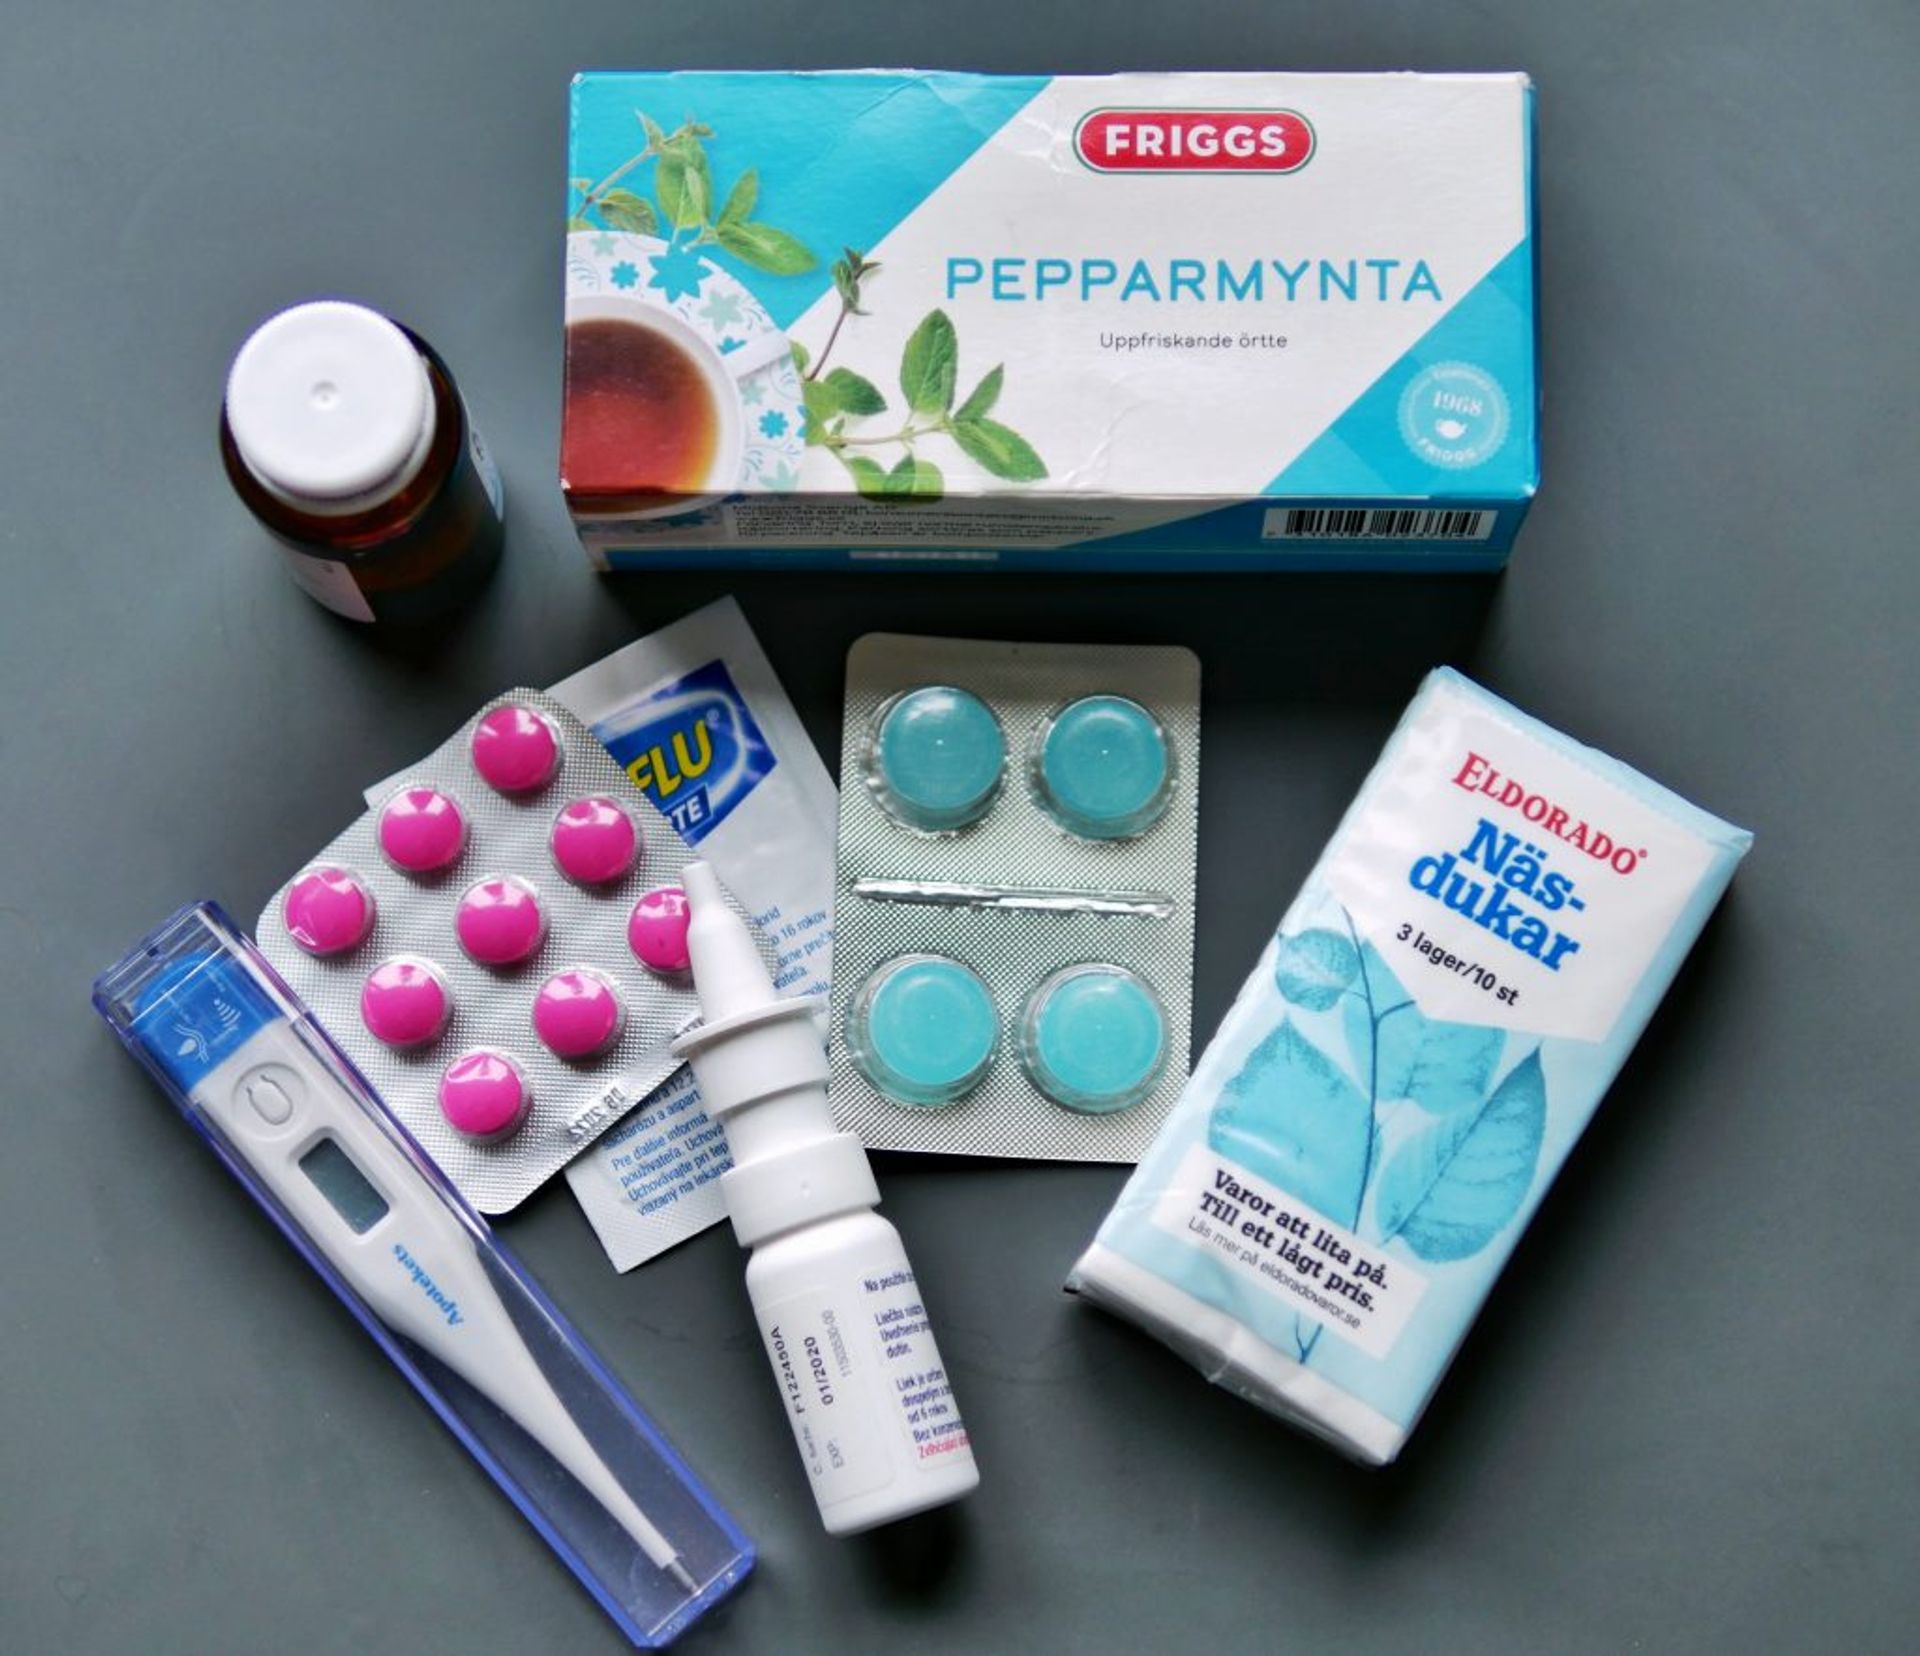 Flu kit containing tea, tissues, thermometer, nasal spray and medications.